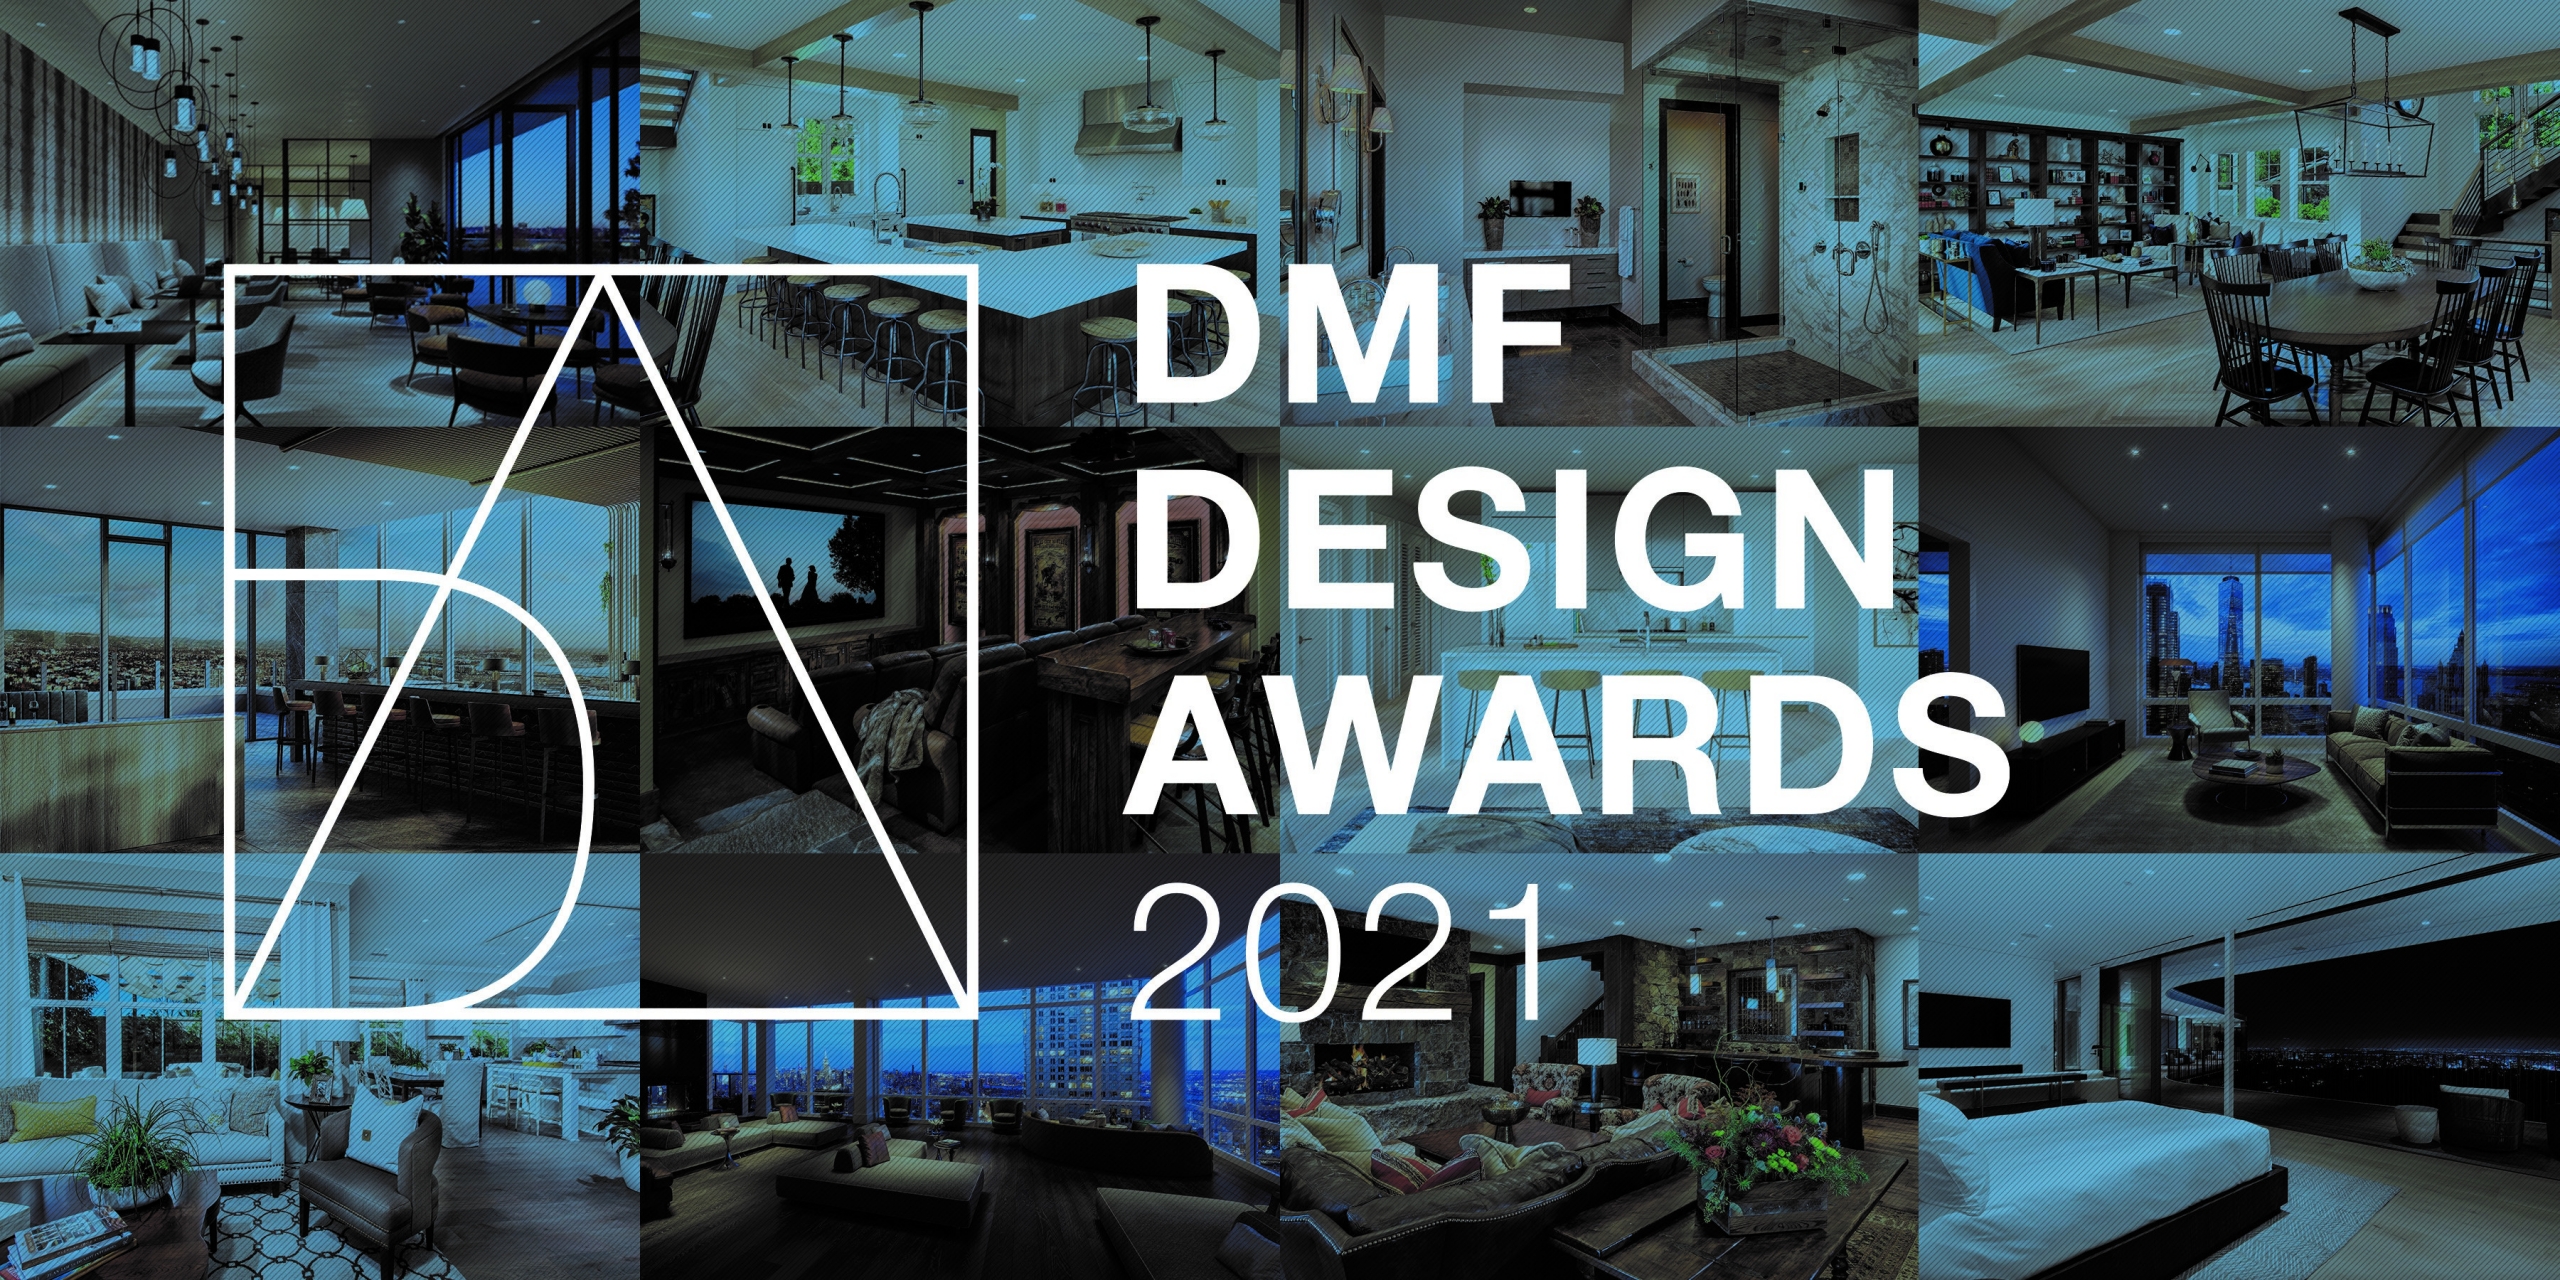 DMF Lighting has opened its 2021 DMF Design Awards. Submissions will be accepted through April 17.